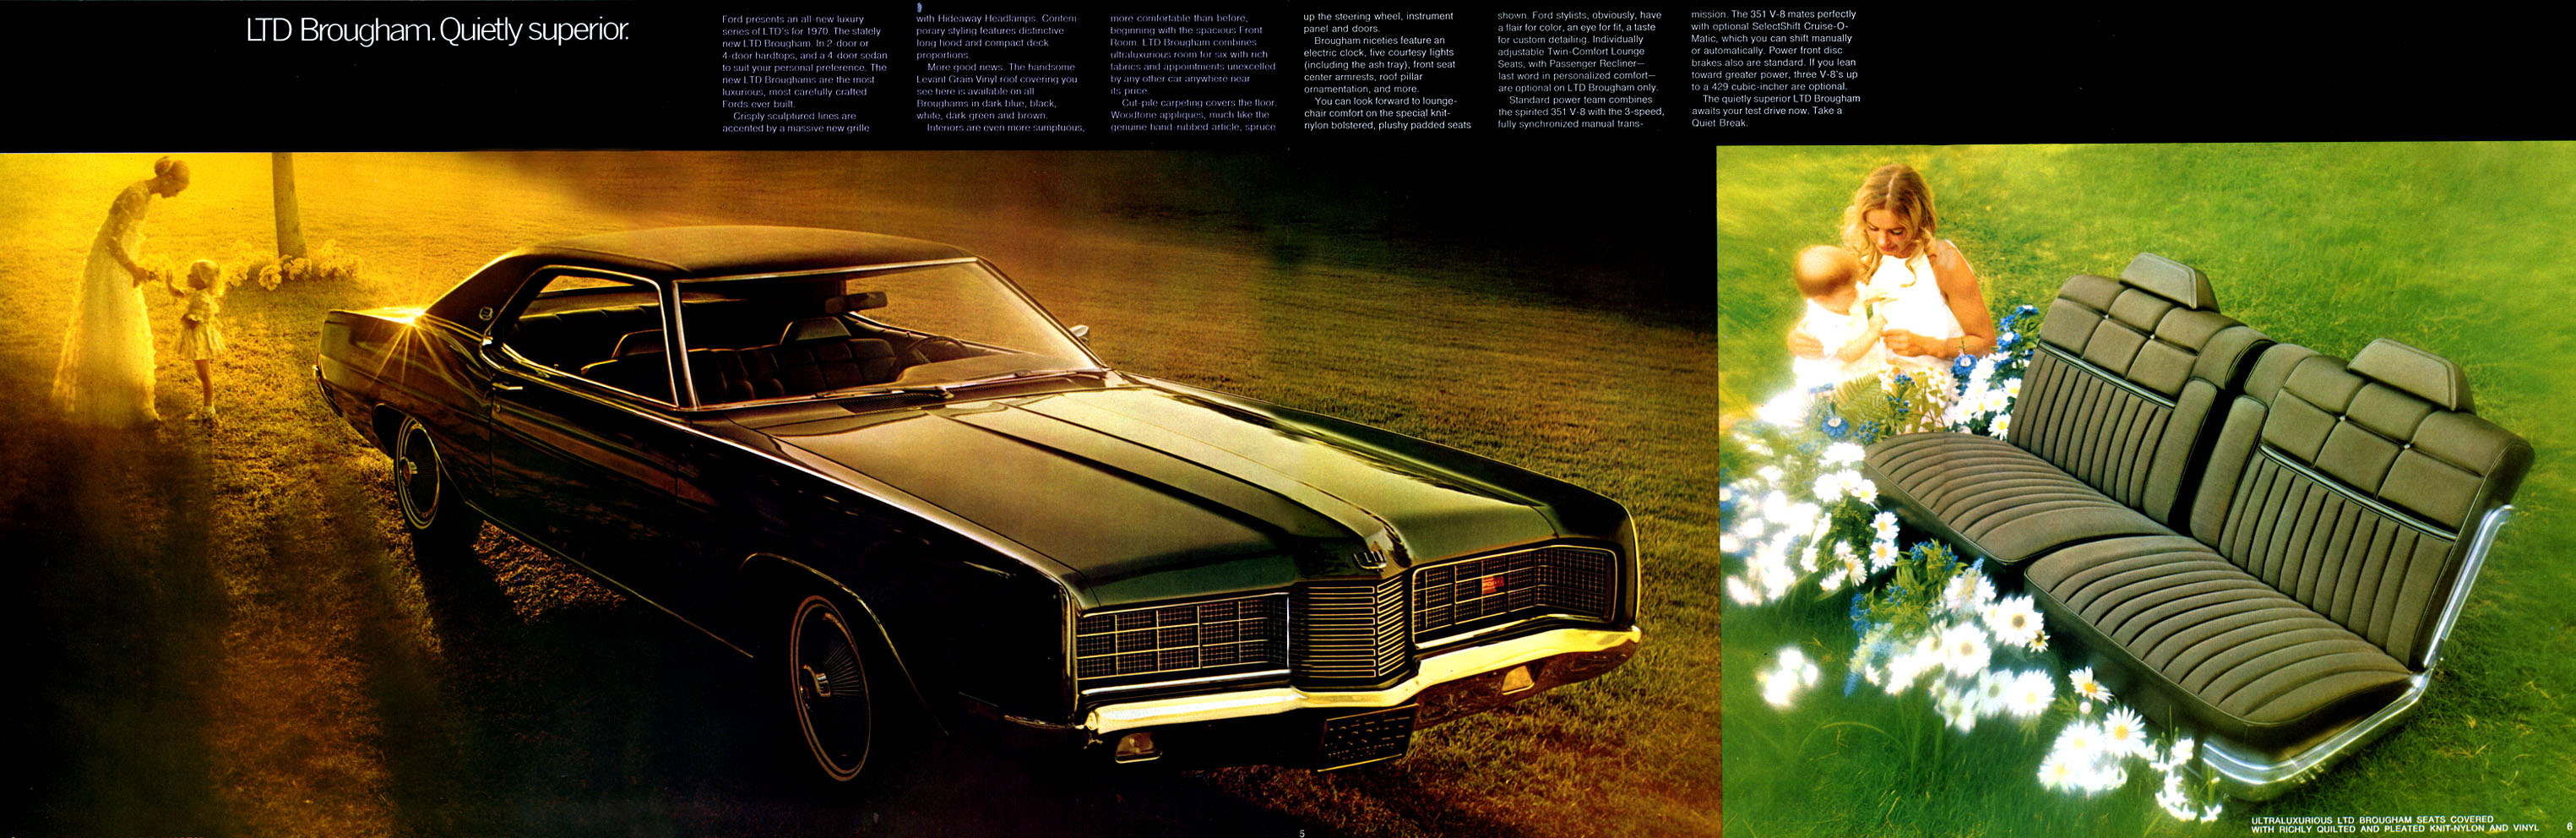 1970_Ford_Full_Size-04-05-06-07